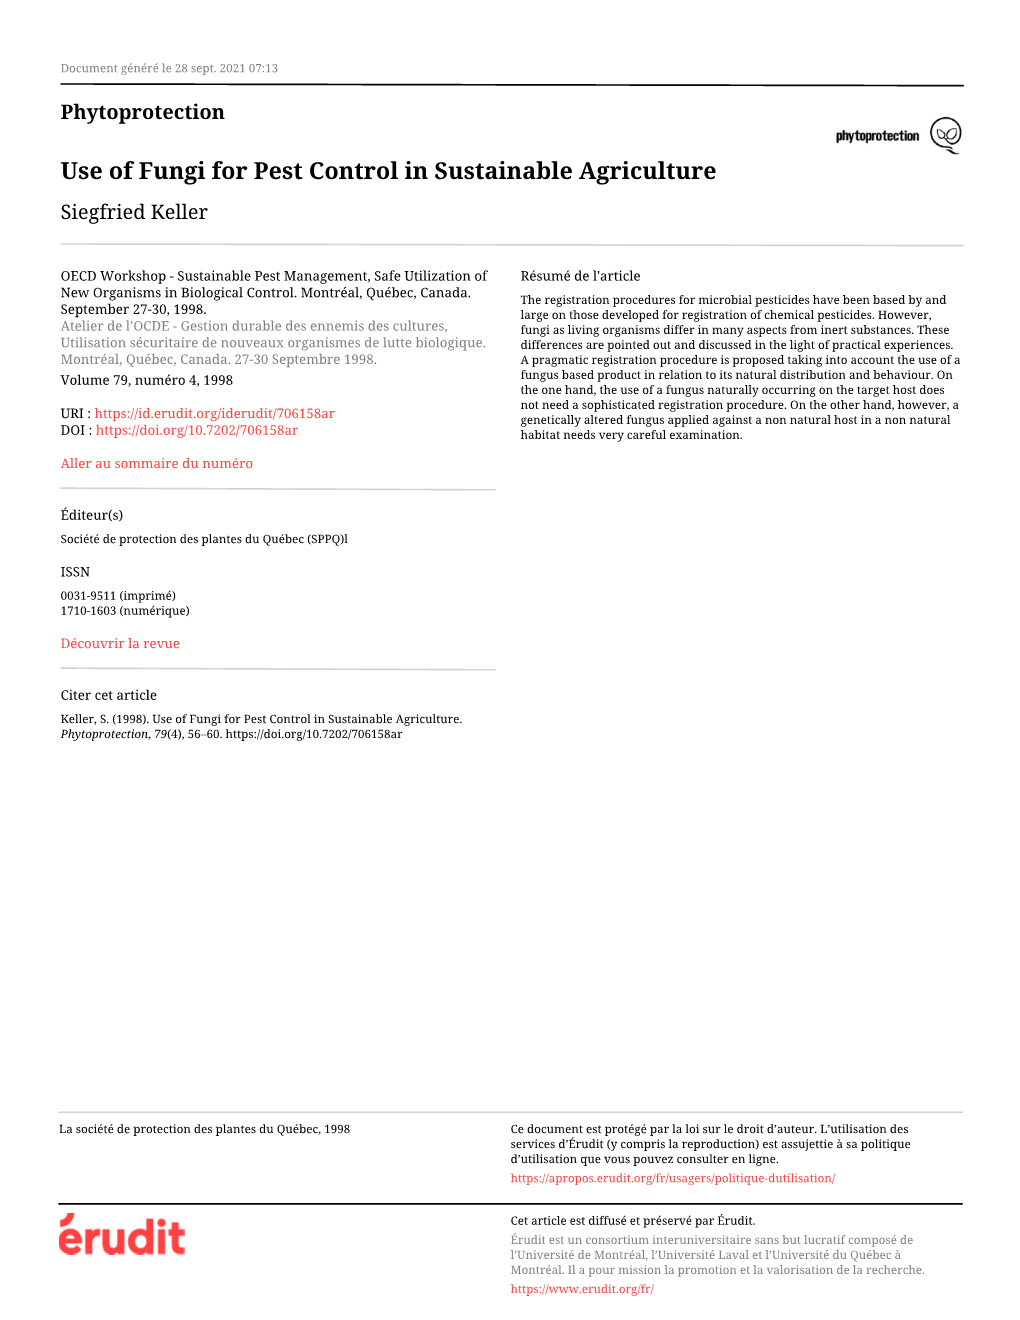 Use of Fungi for Pest Control in Sustainable Agriculture Siegfried Keller